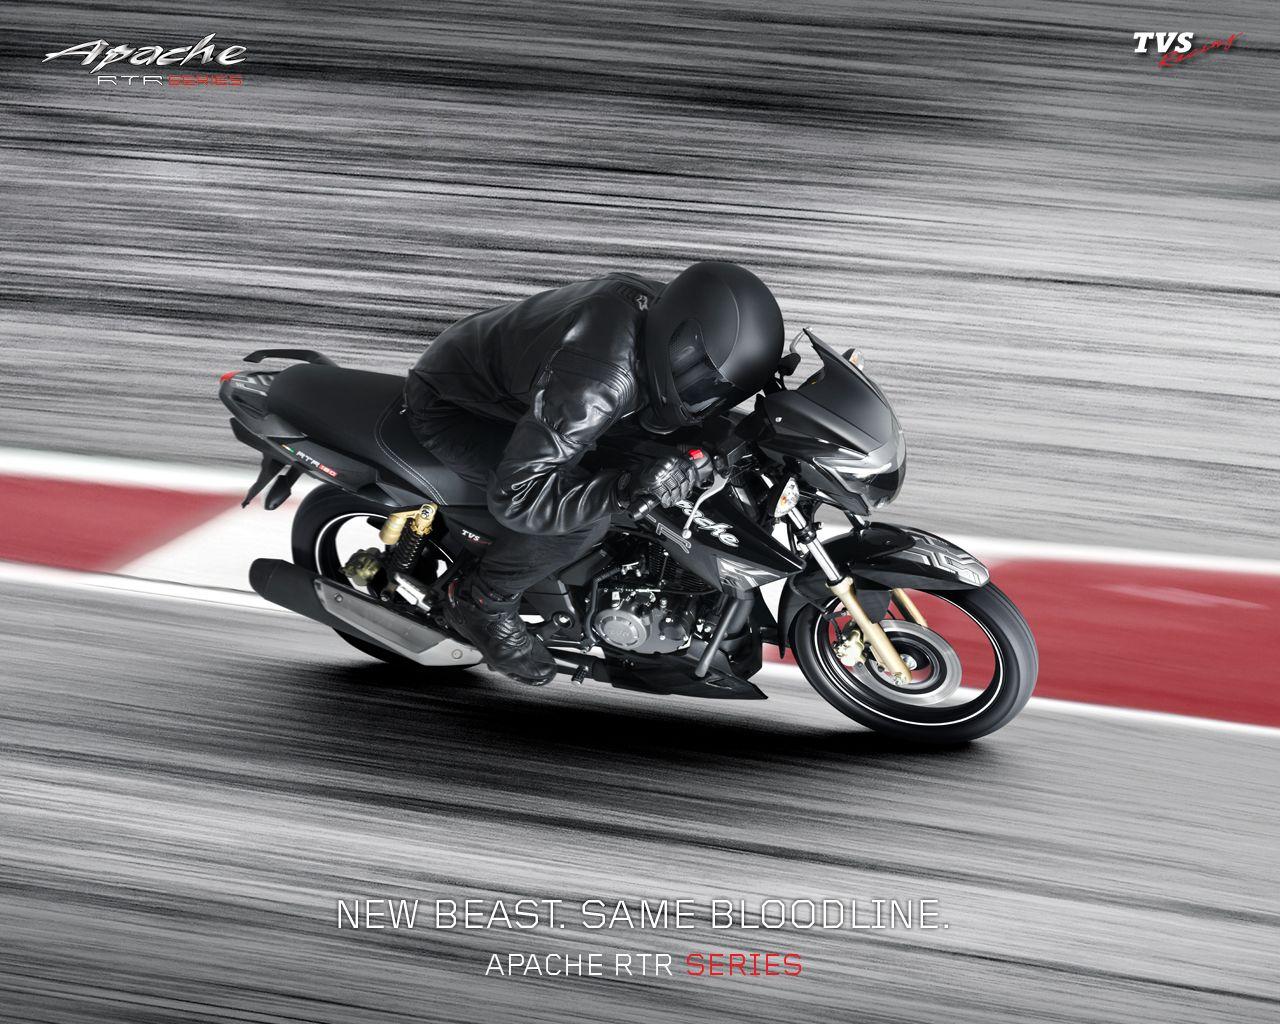 TVS Apache RTR 180 Image, Wallpaper and Photo